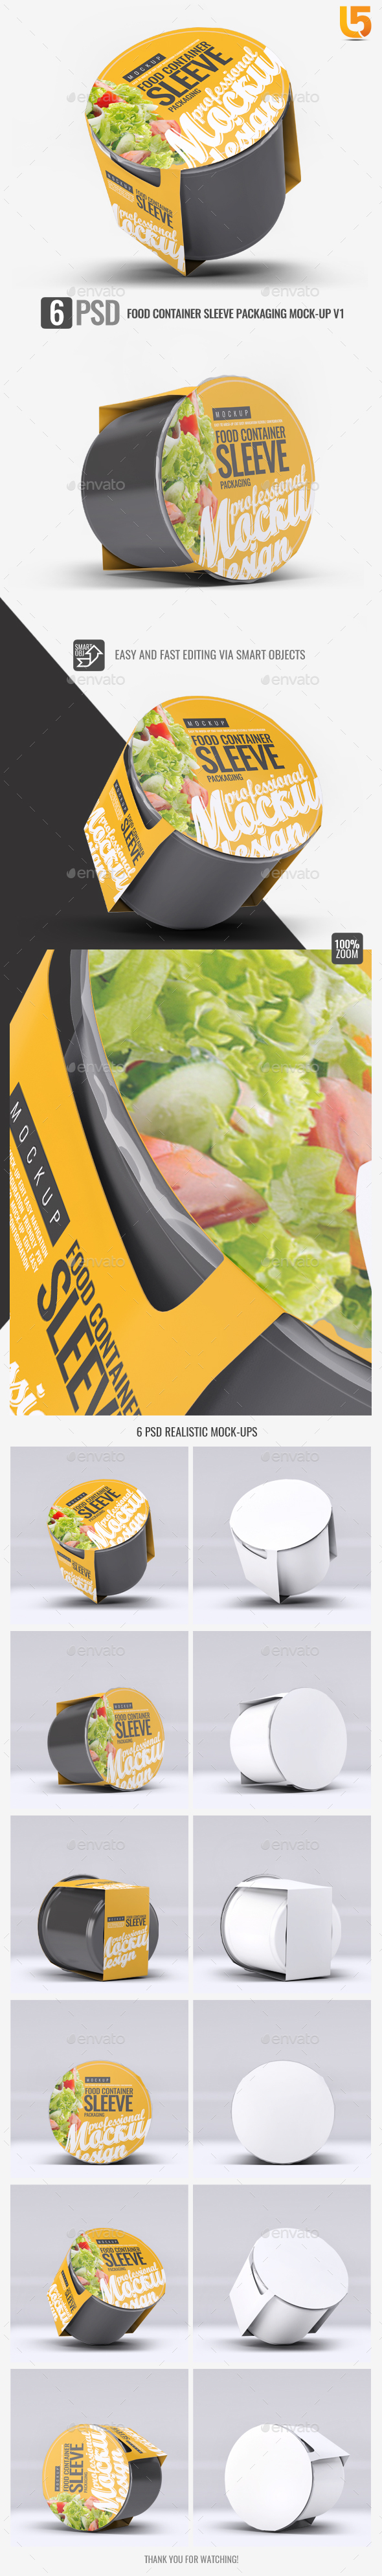 Download Salad Mockup Graphics Designs Templates From Graphicriver